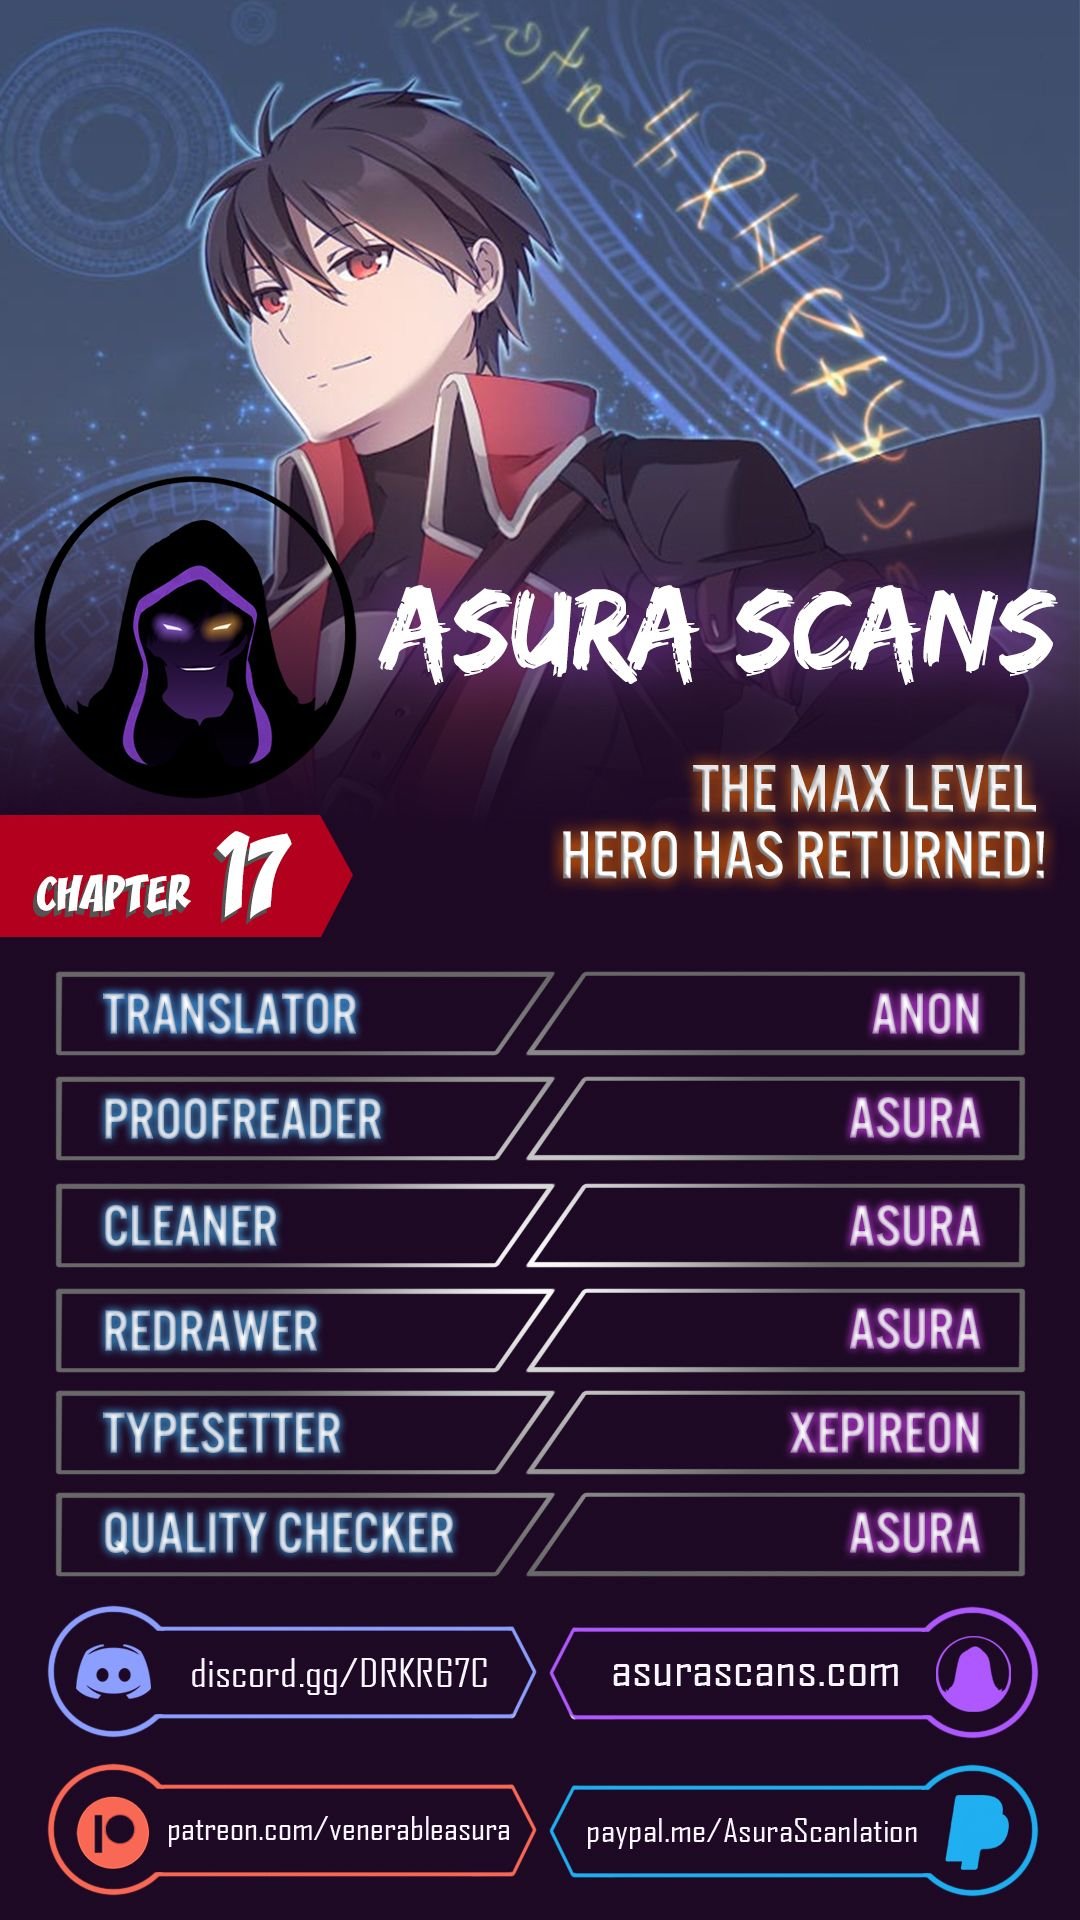 The MAX leveled hero will return! Chapter 17